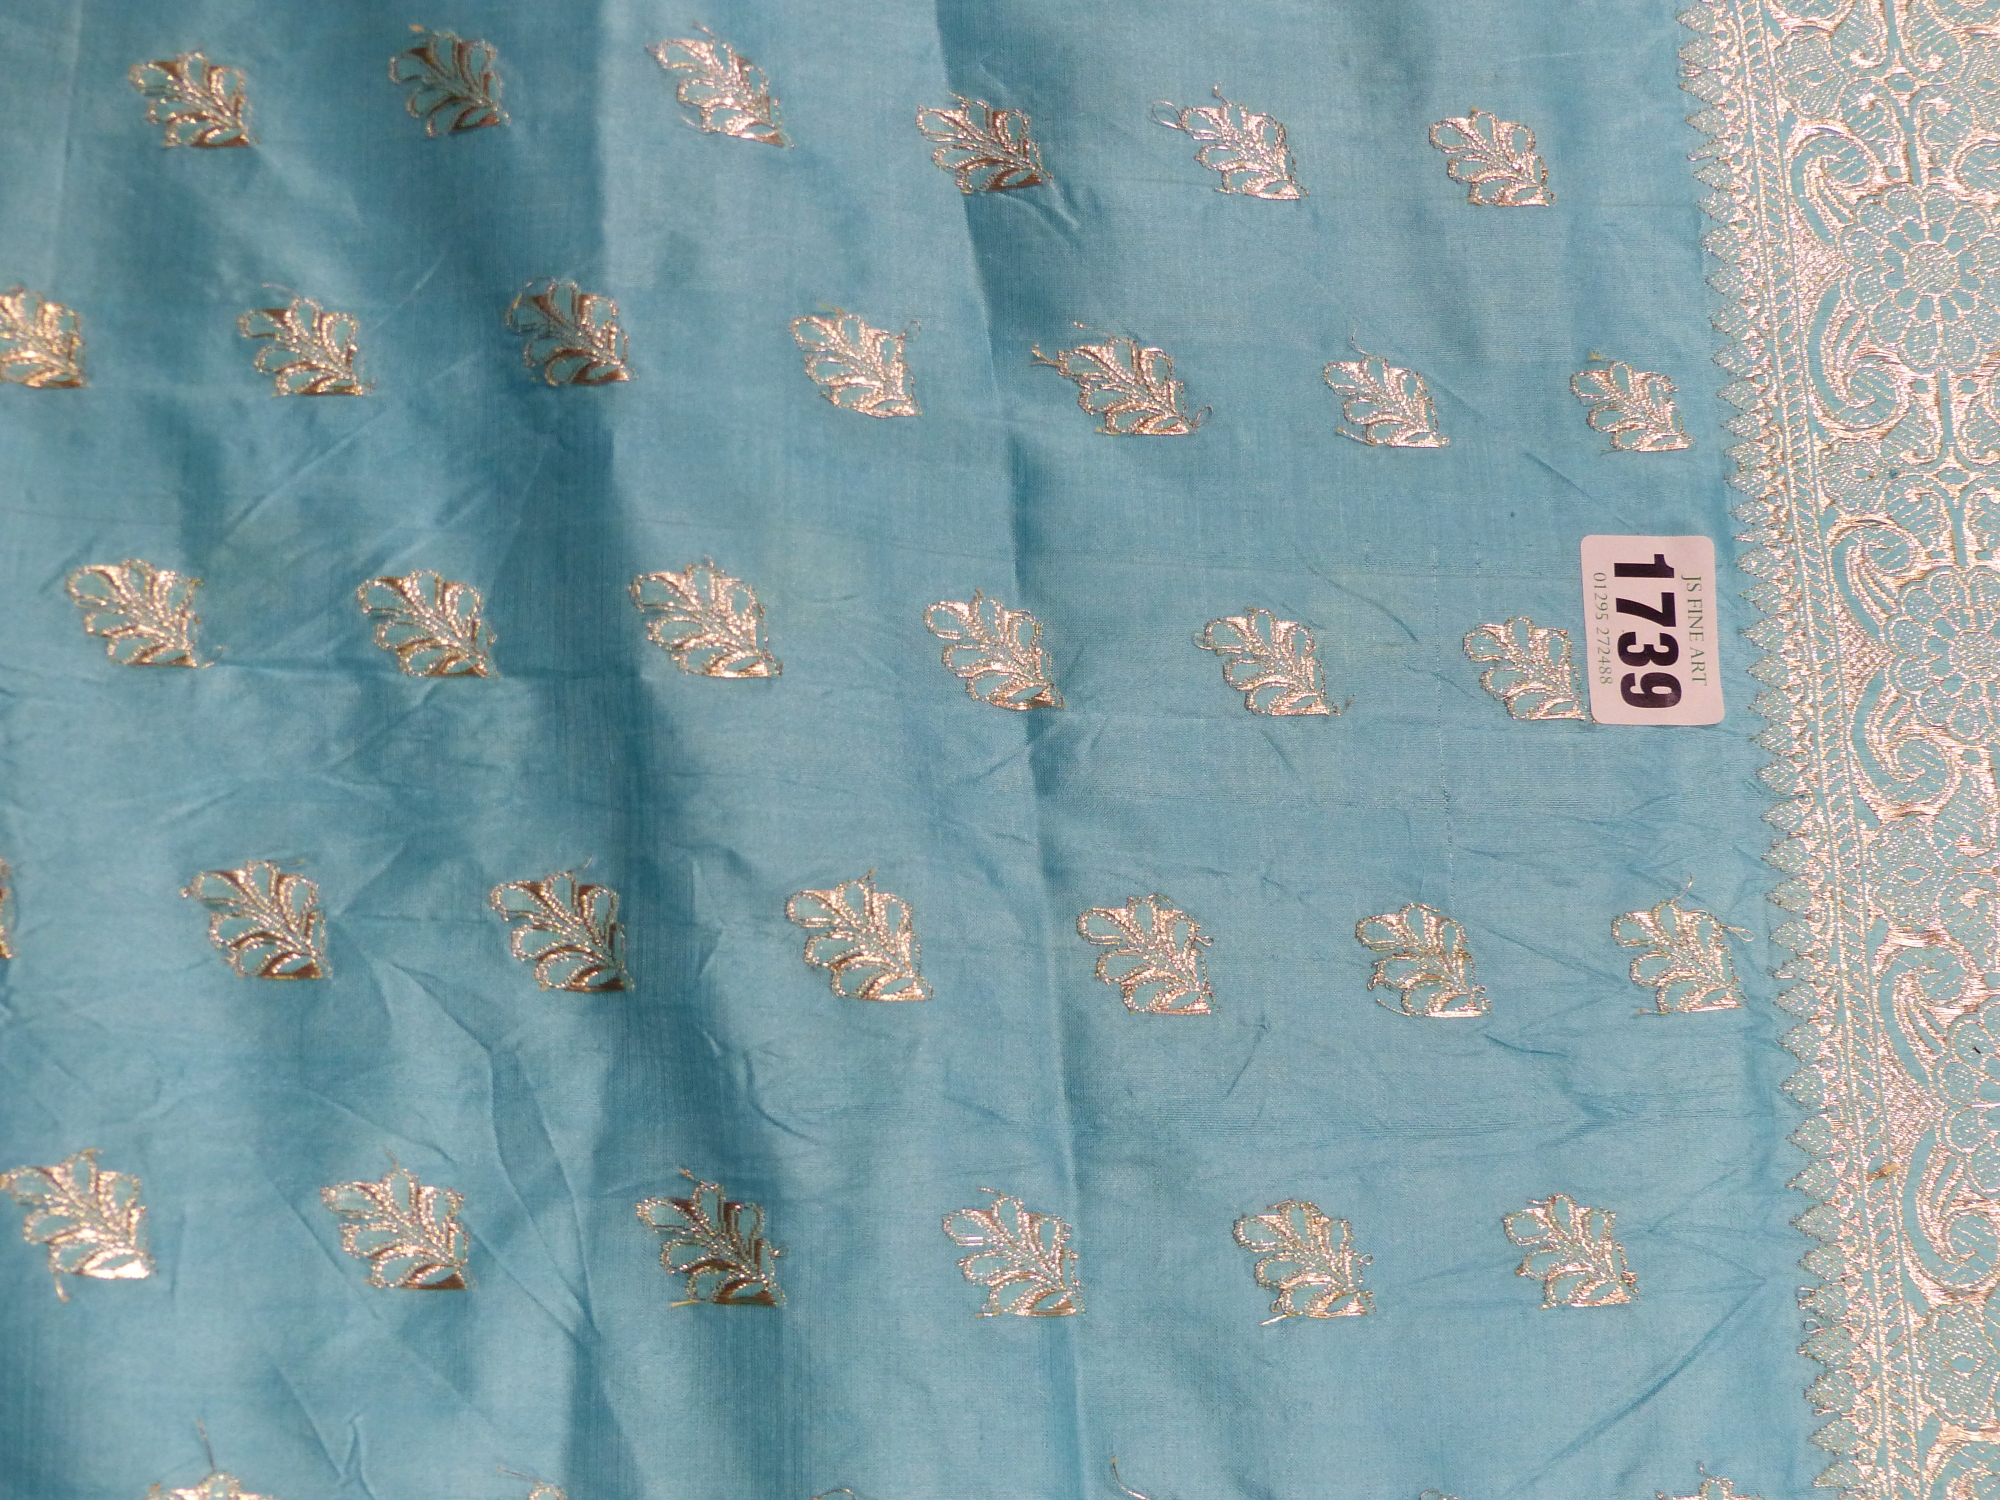 TWO EASTERN PANELS TOGETHER WITH SILK SARI - Image 3 of 14